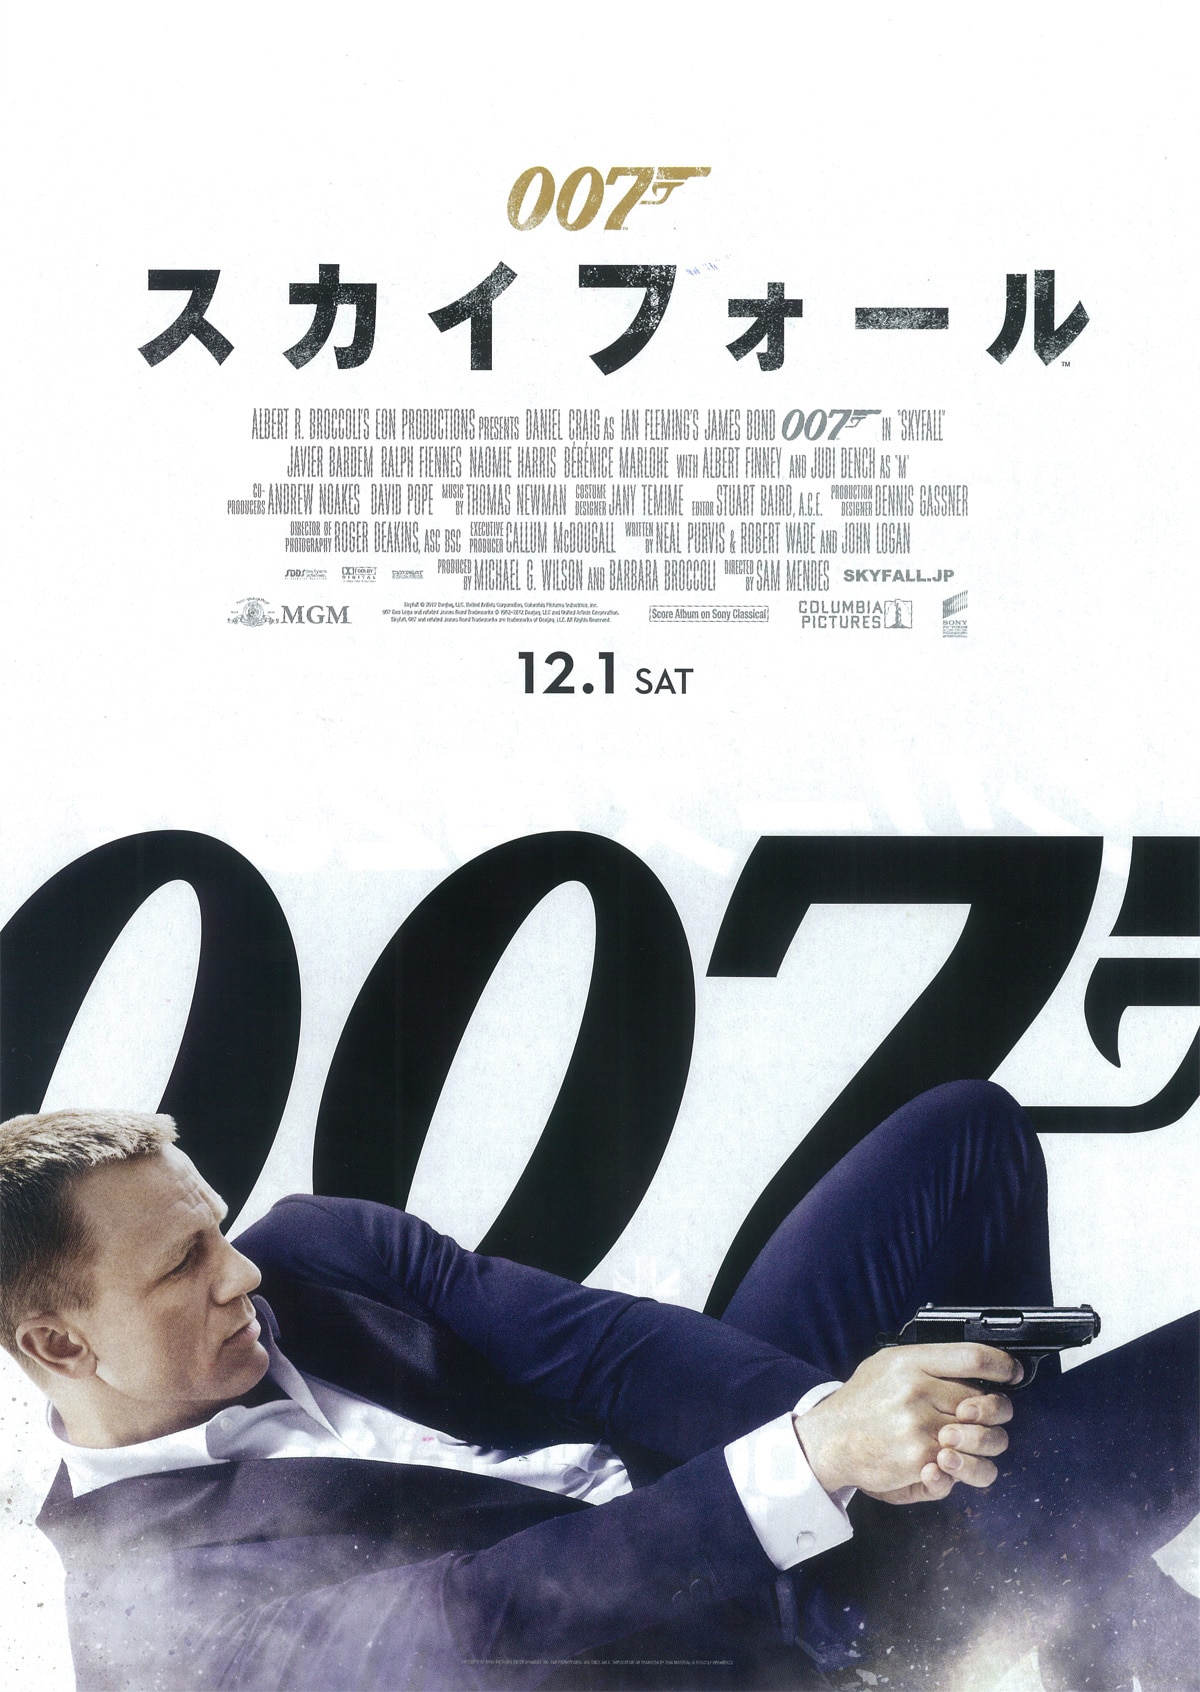 skyfall (C) 2012 Danjaq, LLC, United Artists Corporation, Columbia Pictures Industries, Inc. All rights reserved.